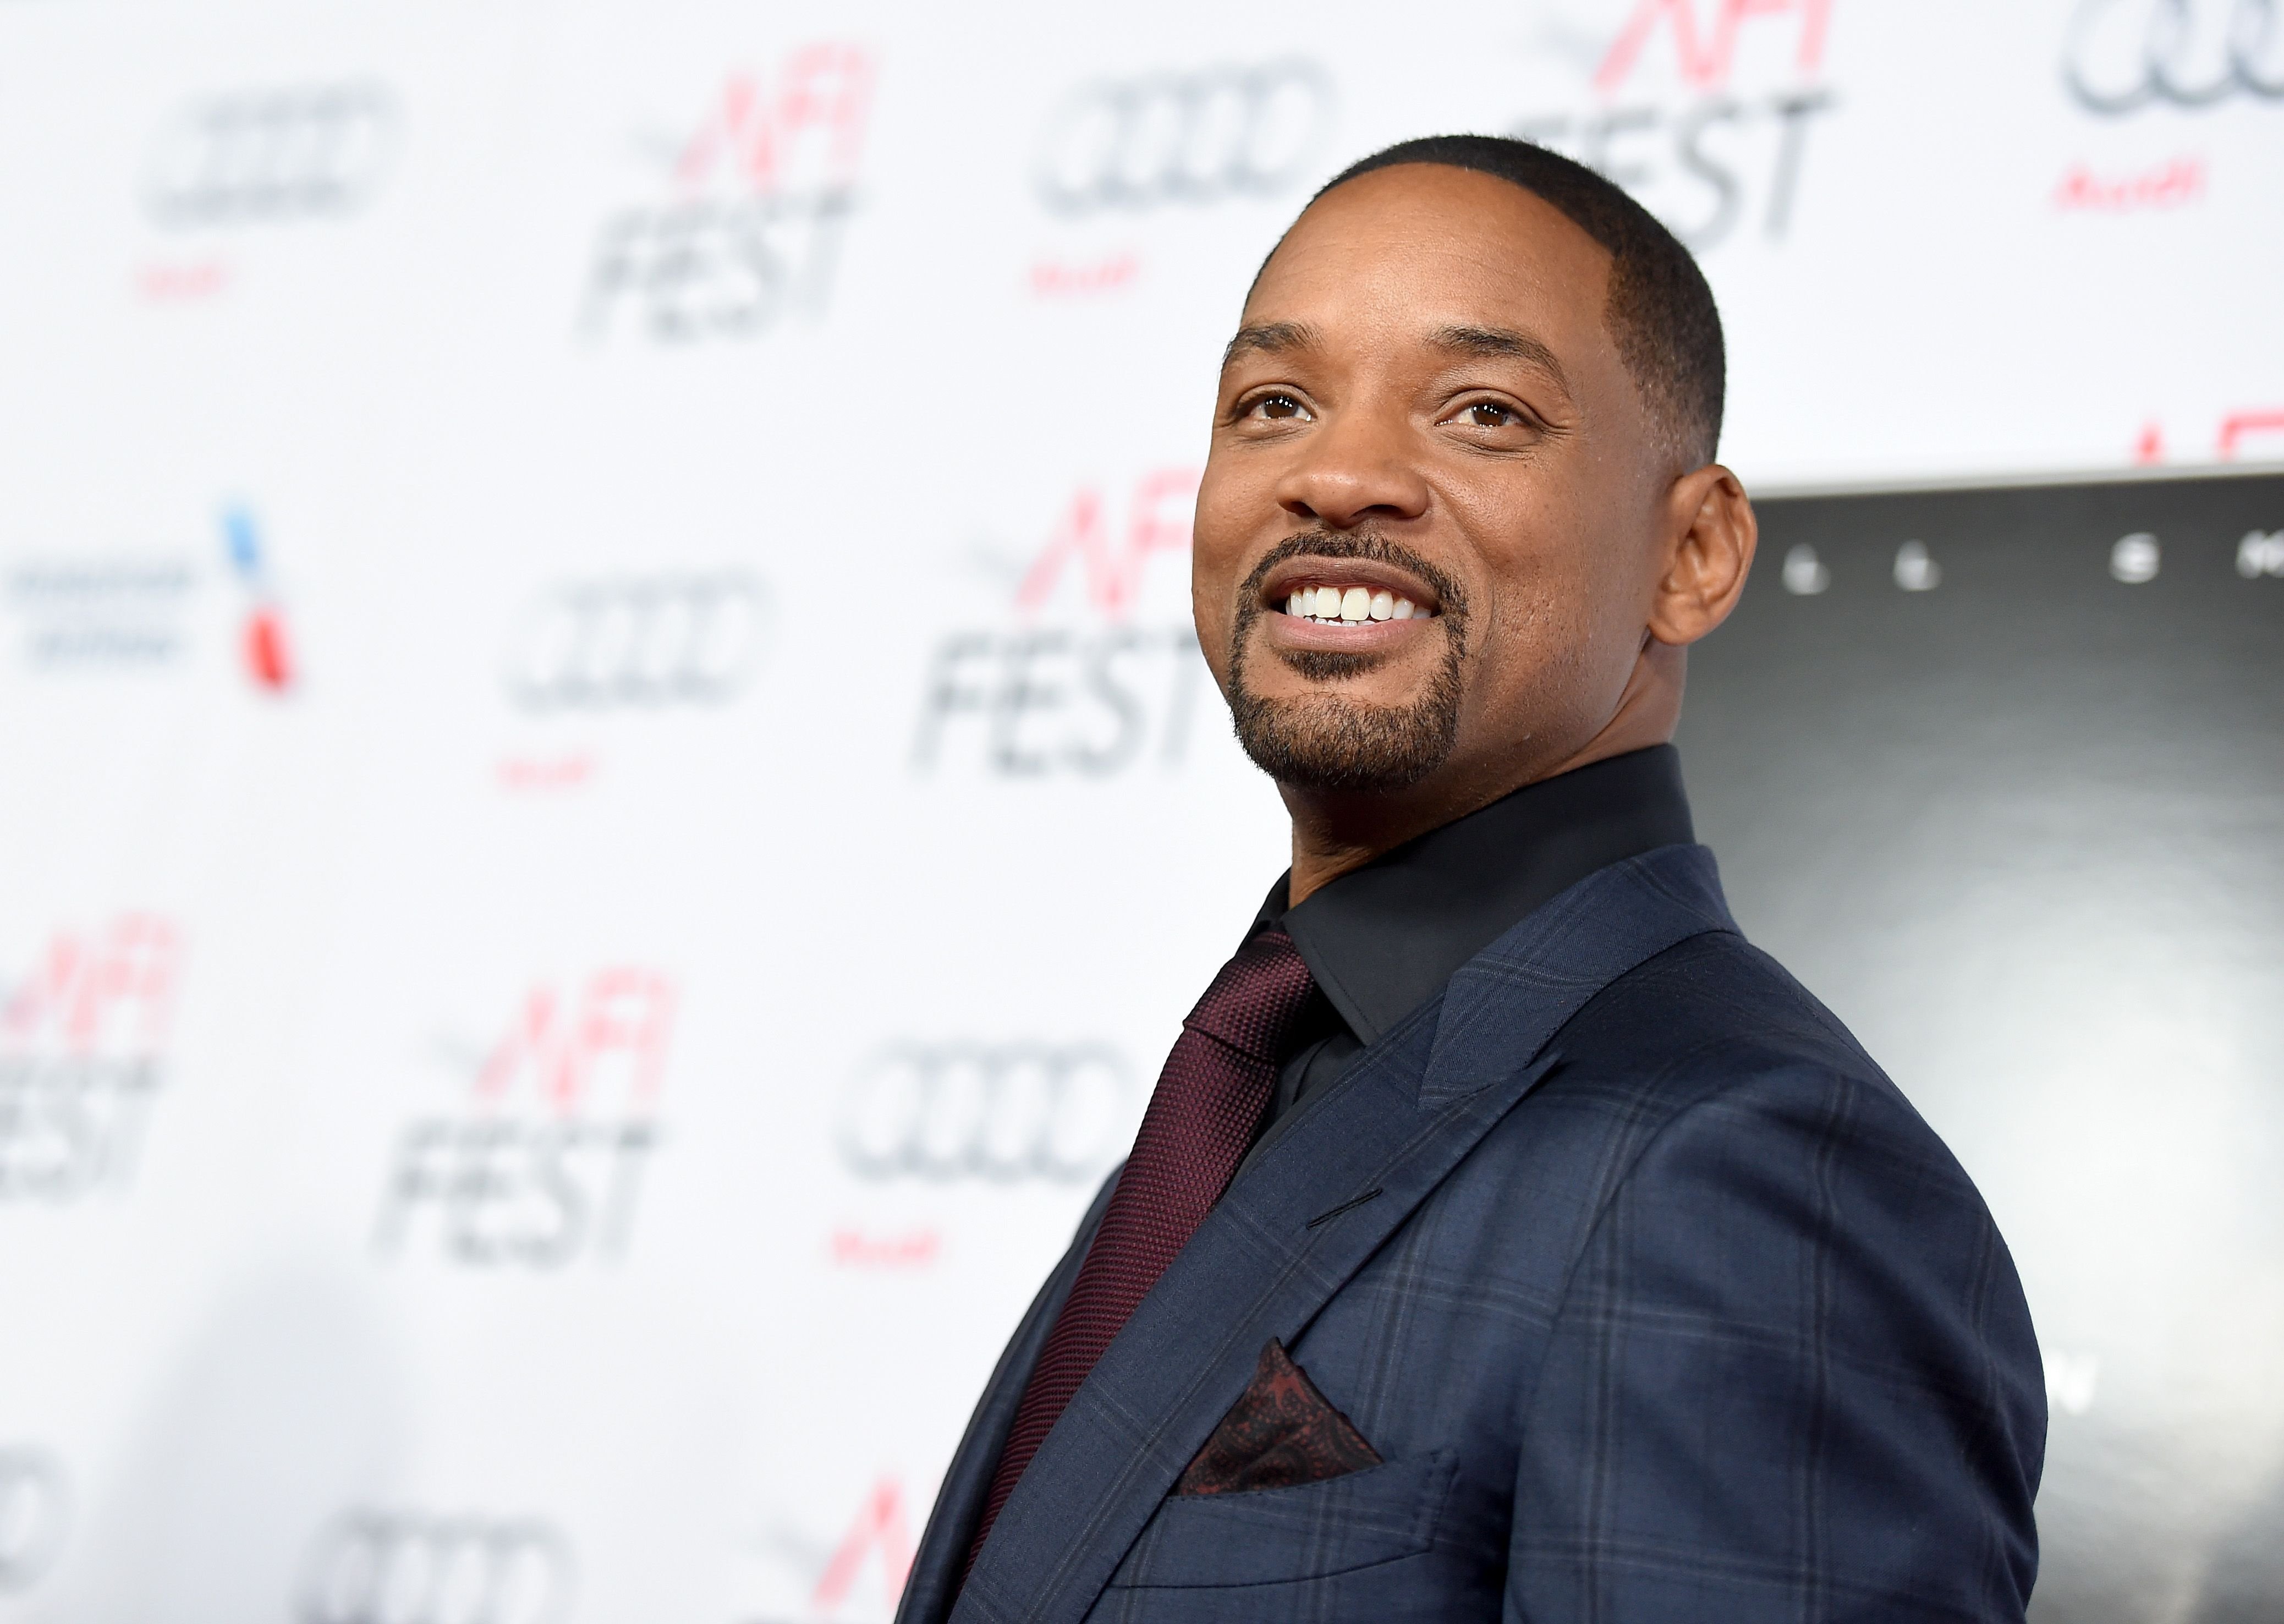 Will Smith at the premiere of' "Concussion" during AFI FEST 2015 on November 10, 2015 | Photo: Getty Images